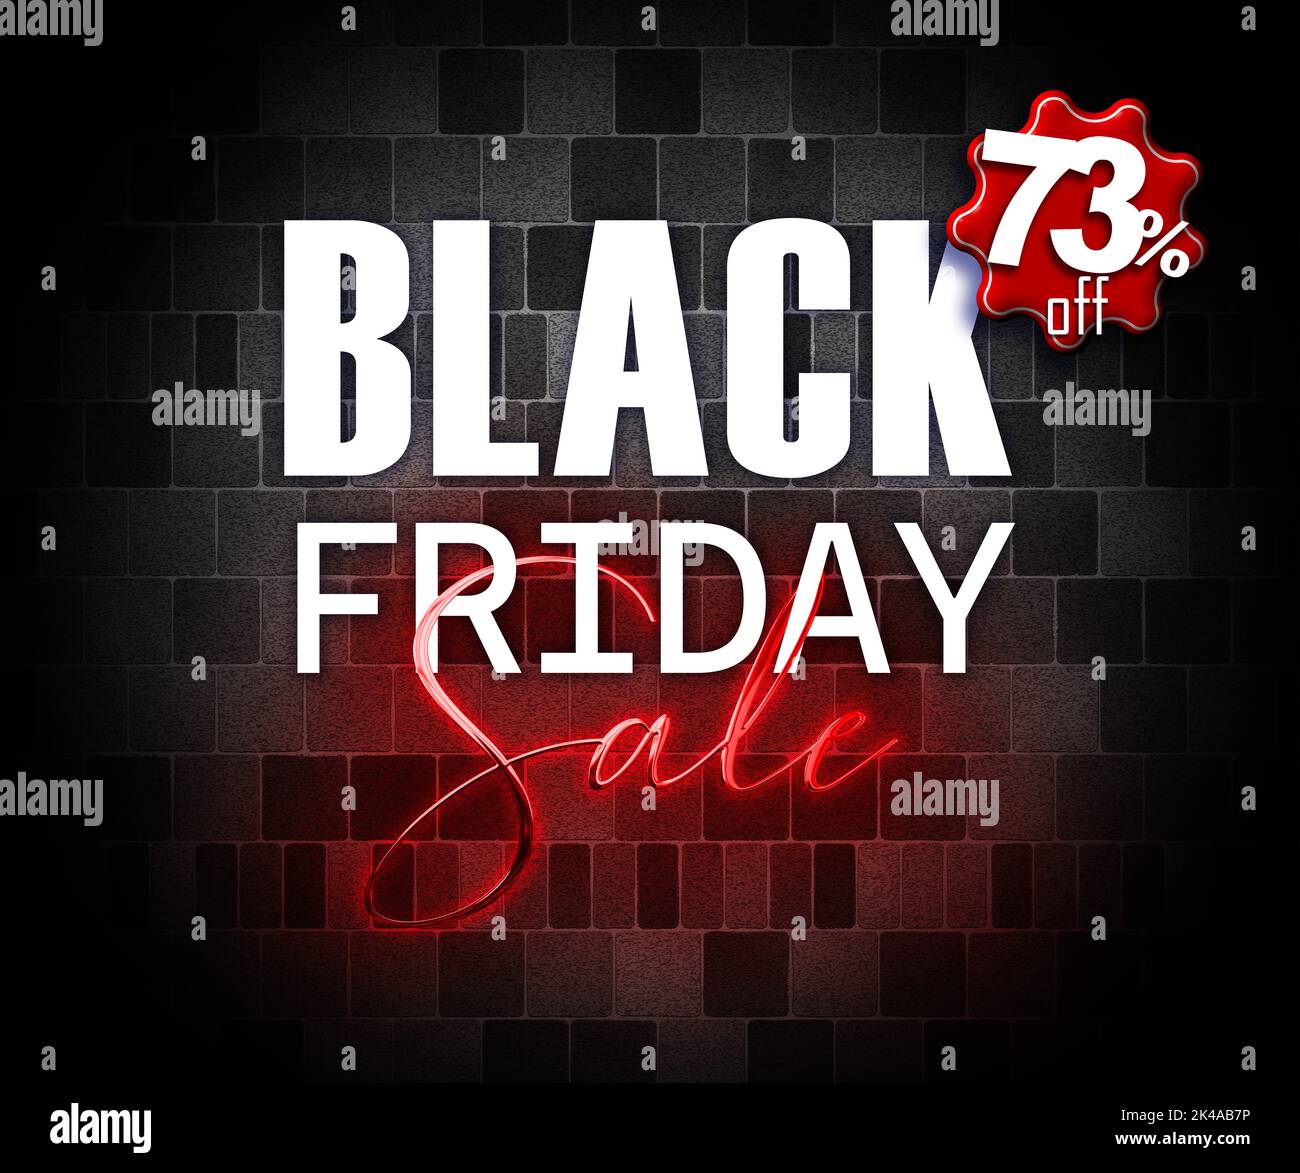 illustration with 3d elements black friday promotion banner 73 percent off sales increase Stock Photo